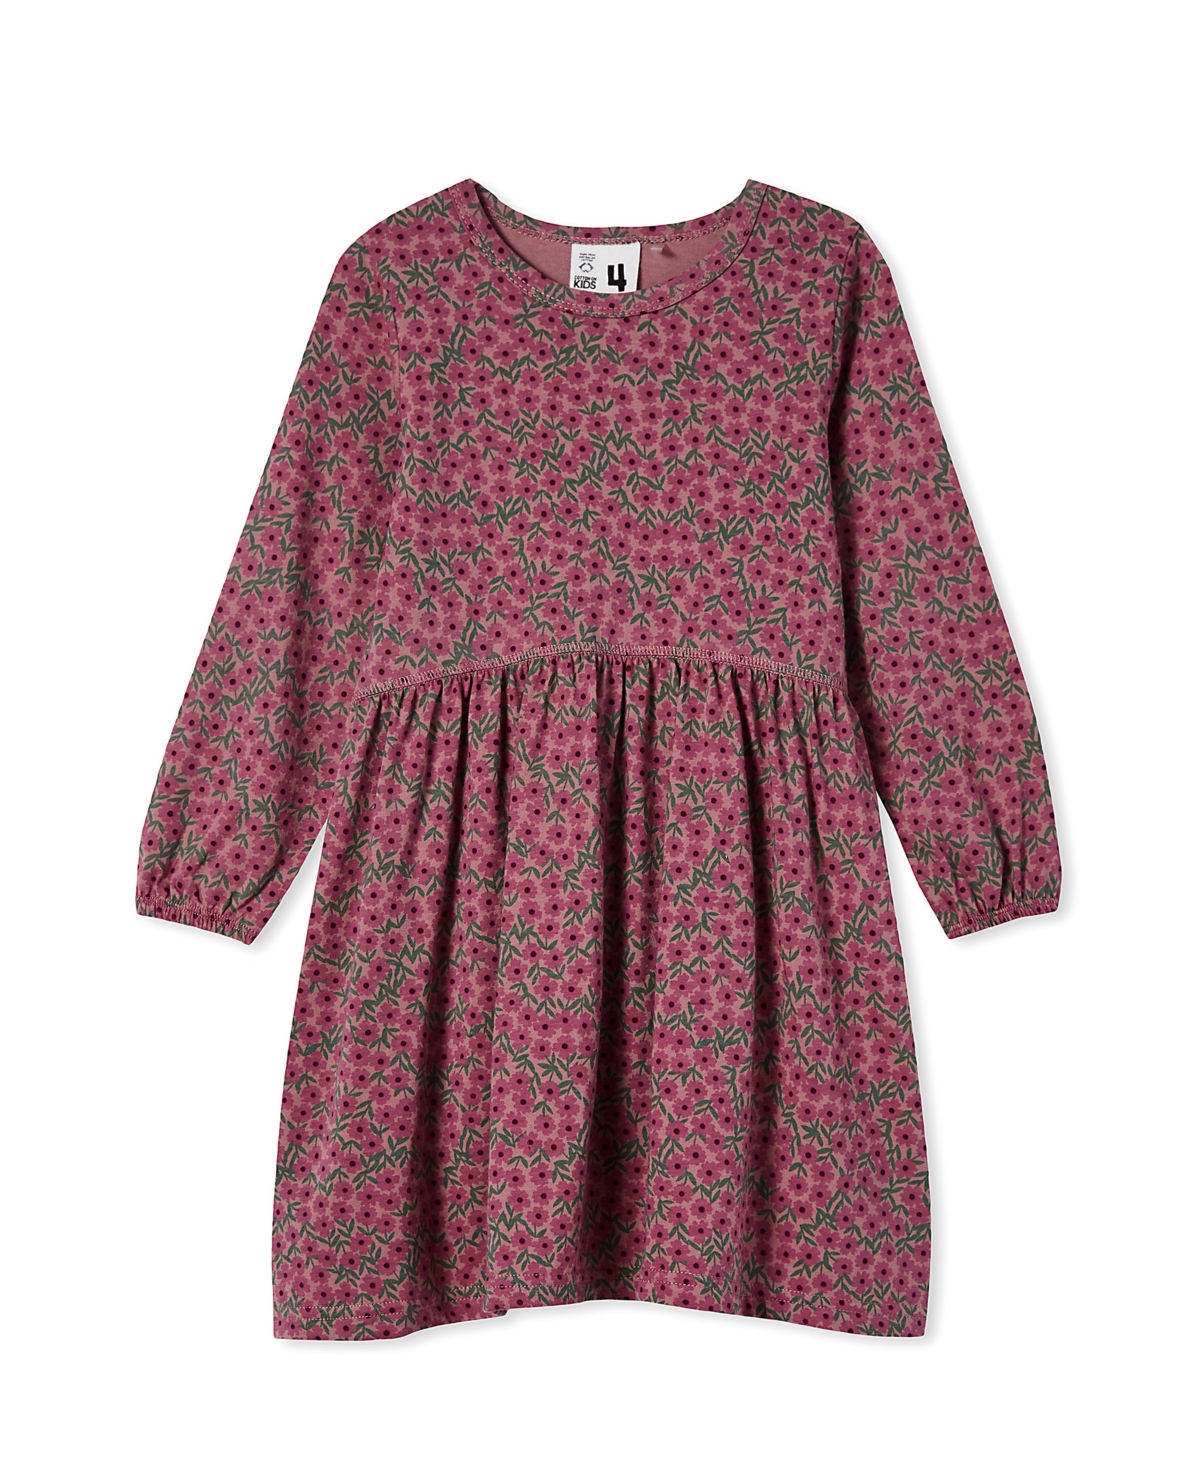 Cotton On Toddler Girls Savannah Long Sleeve Dress In Dusty Berry/mini Ditsy